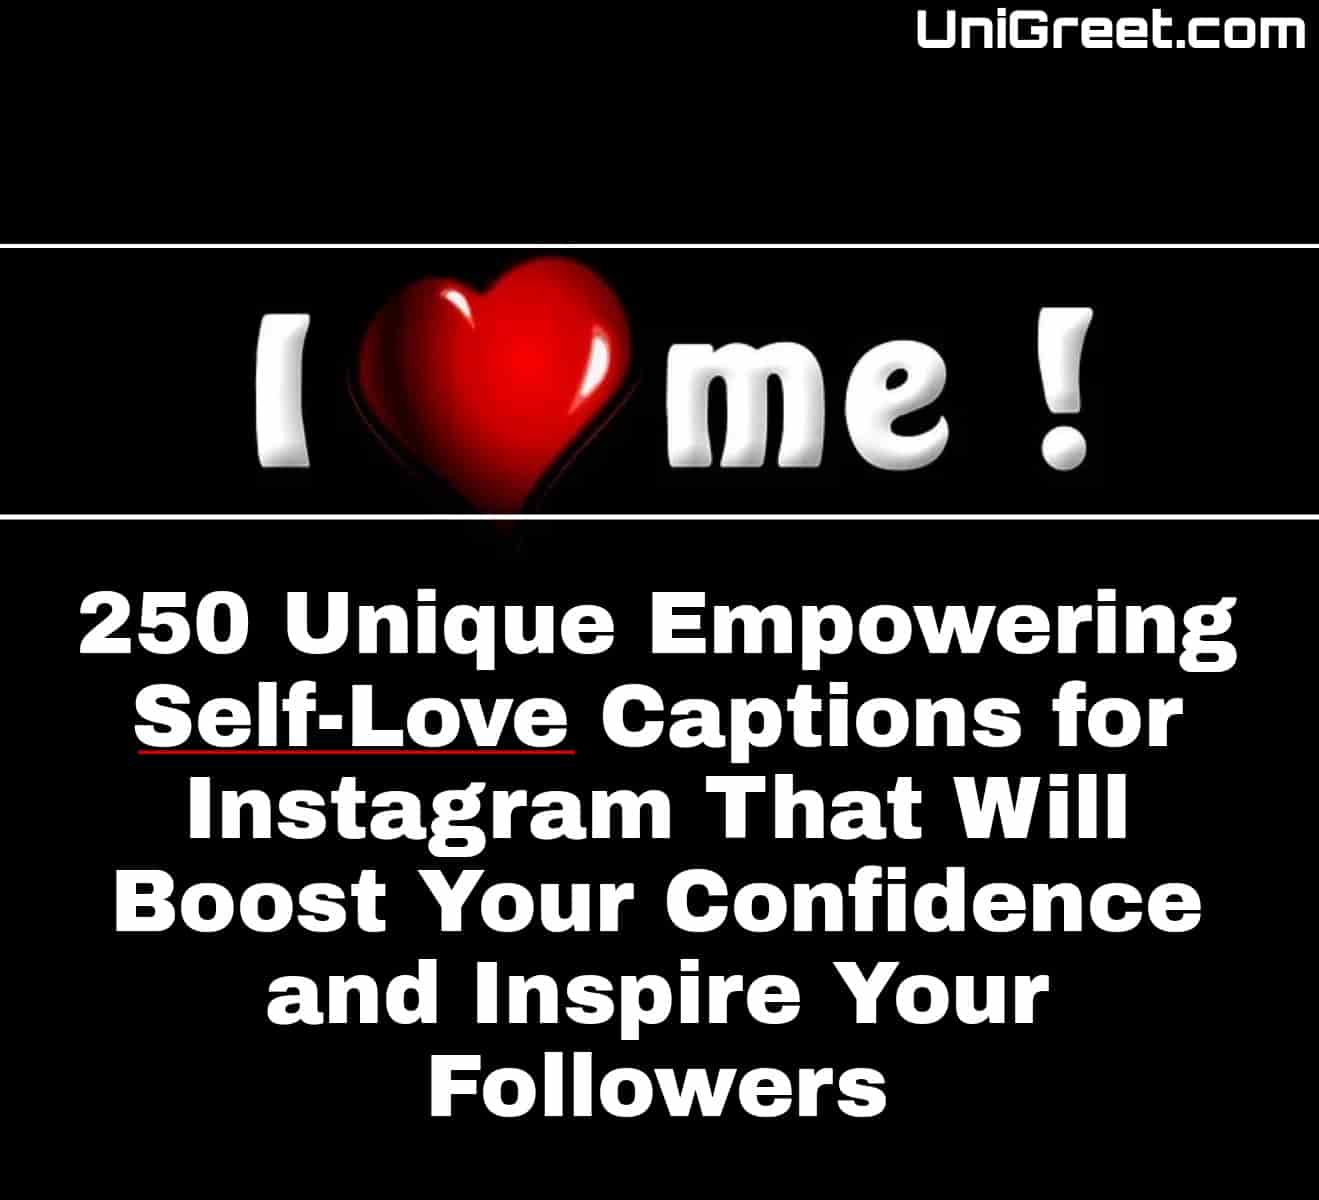 250 Empowering Self-Love Captions for Instagram That Will Boost Your Confidence and Inspire Your Followers